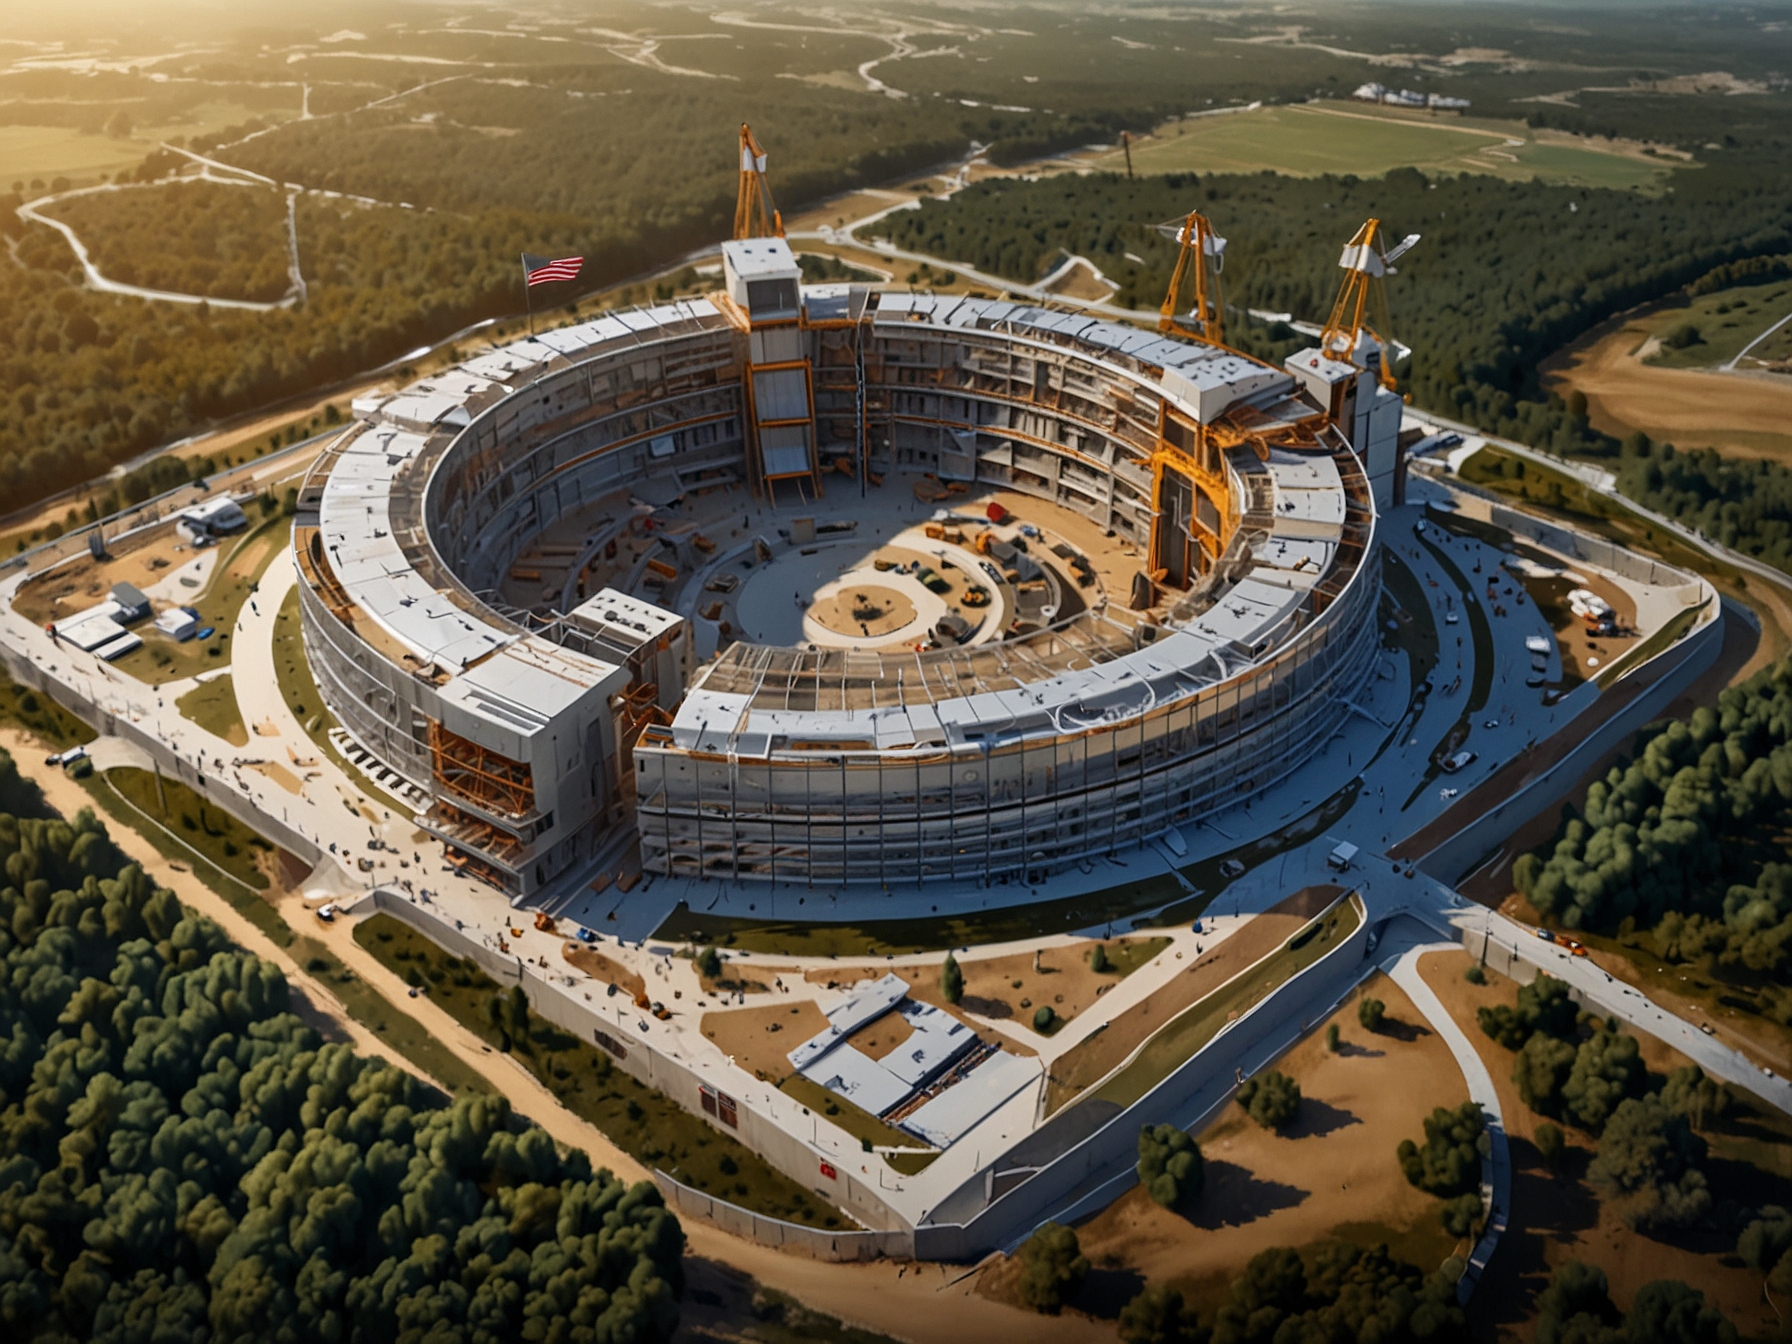 An aerial view of the ITER construction site in southern France, showcasing the immense scale of the project. The intricate network of structures highlights the collaborative effort from multiple countries.